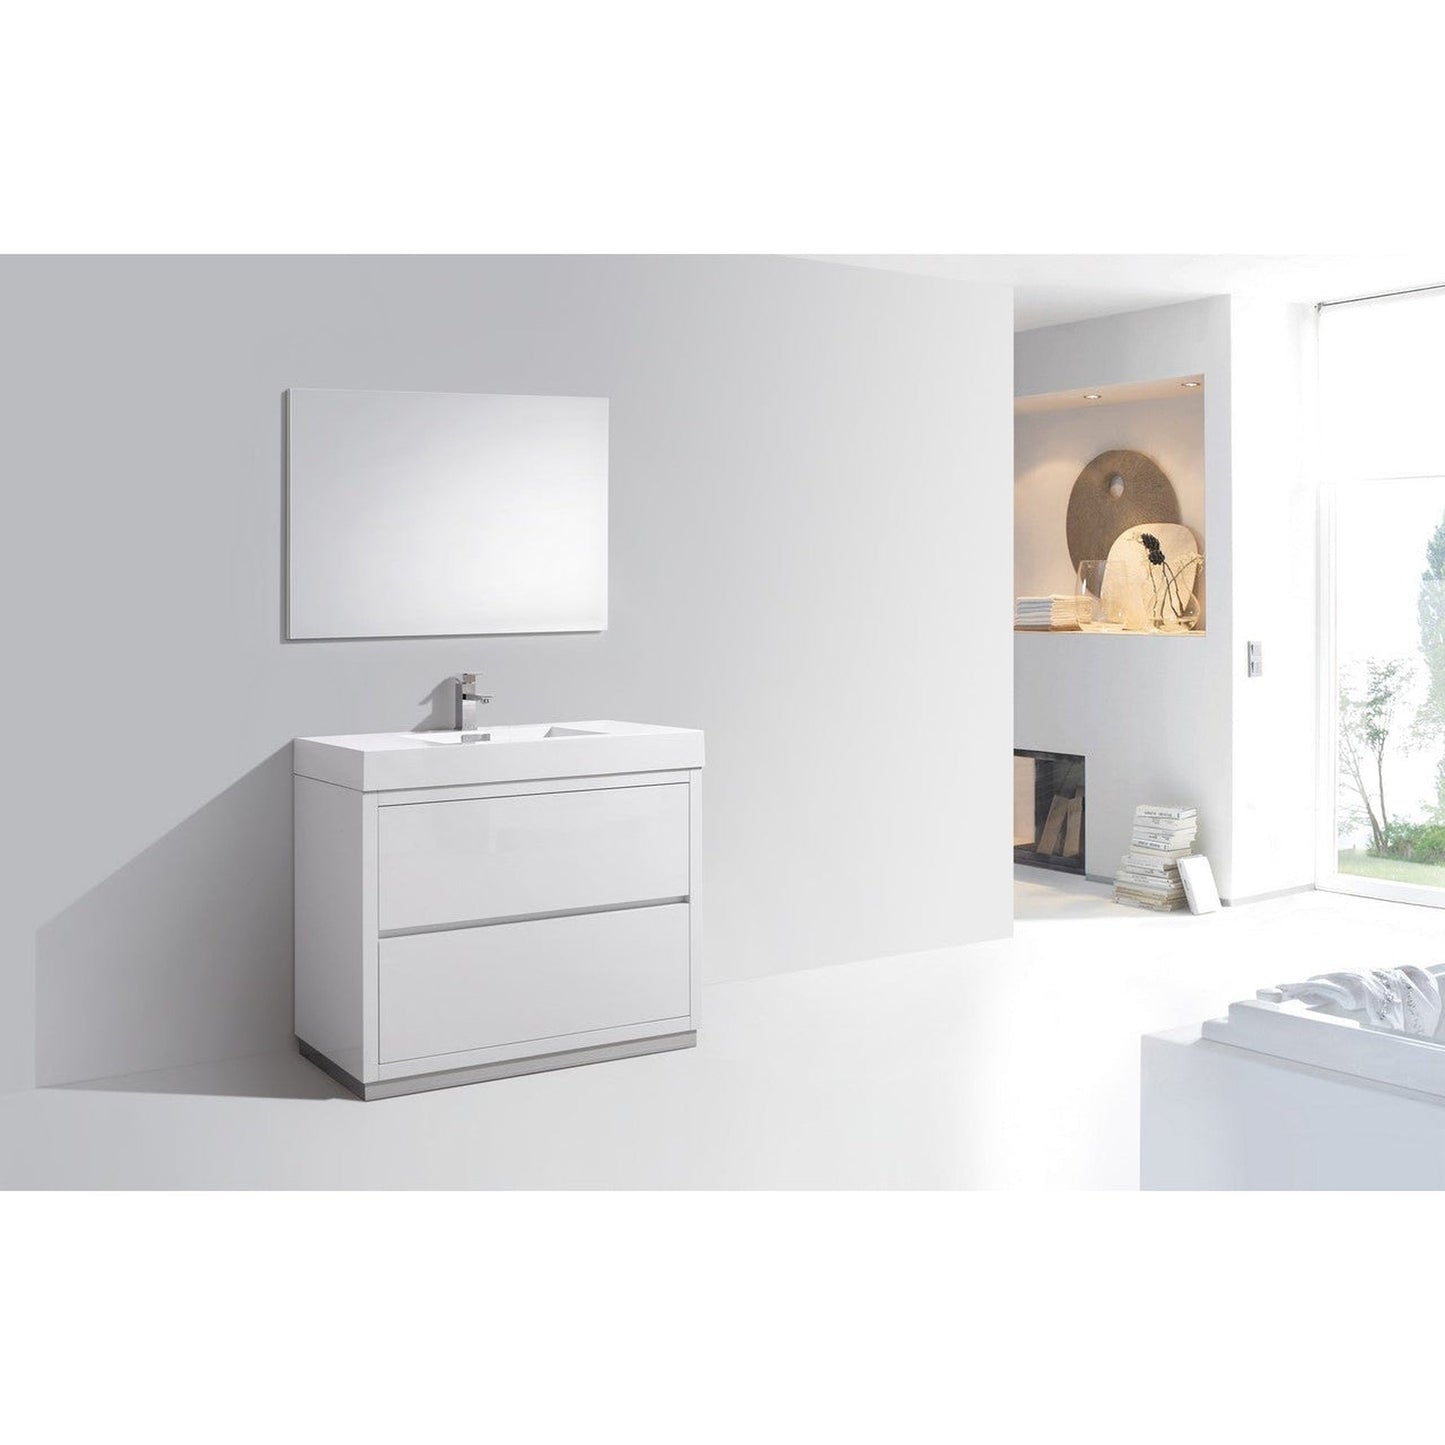 KubeBath Bliss 40" High Gloss White Freestanding Modern Bathroom Vanity With Single Integrated Acrylic Sink With Overflow and 36" White Framed Mirror With Shelf